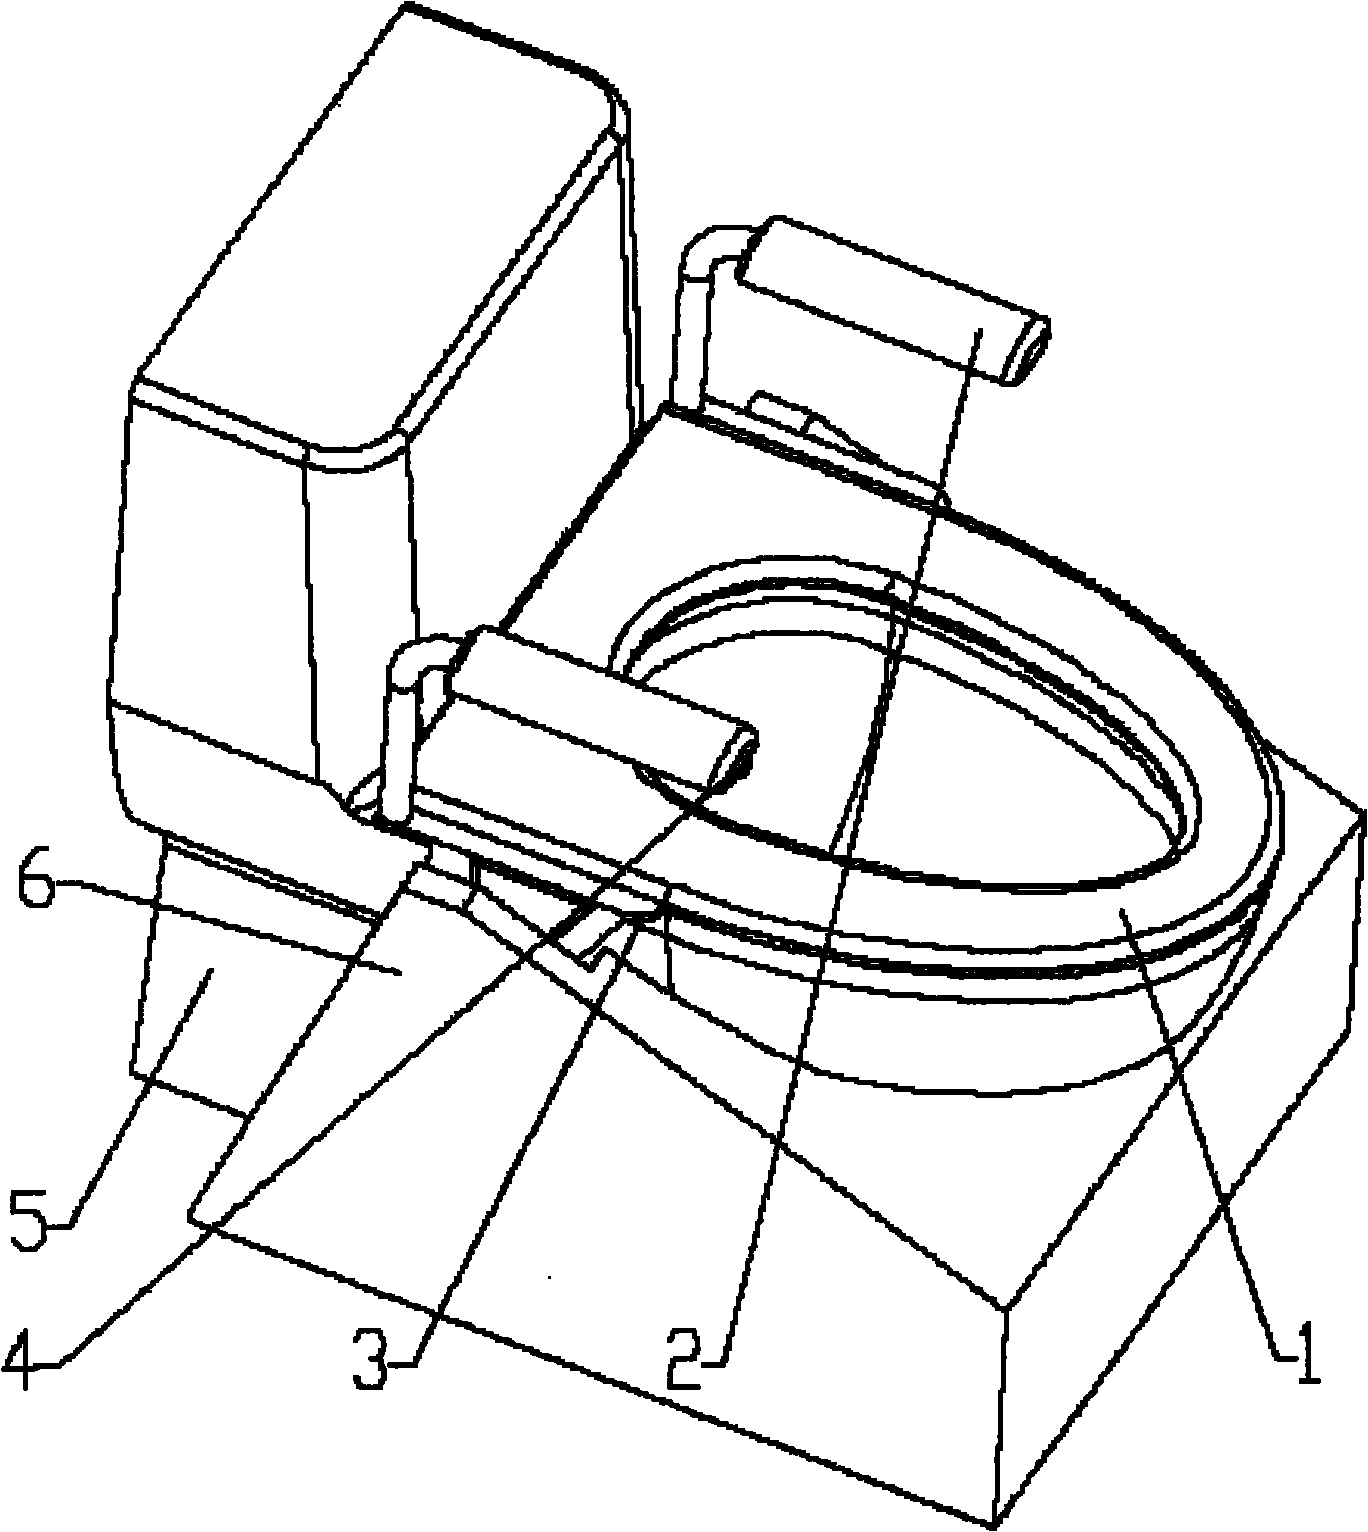 Pedestal pan ring capable of automatic lifting